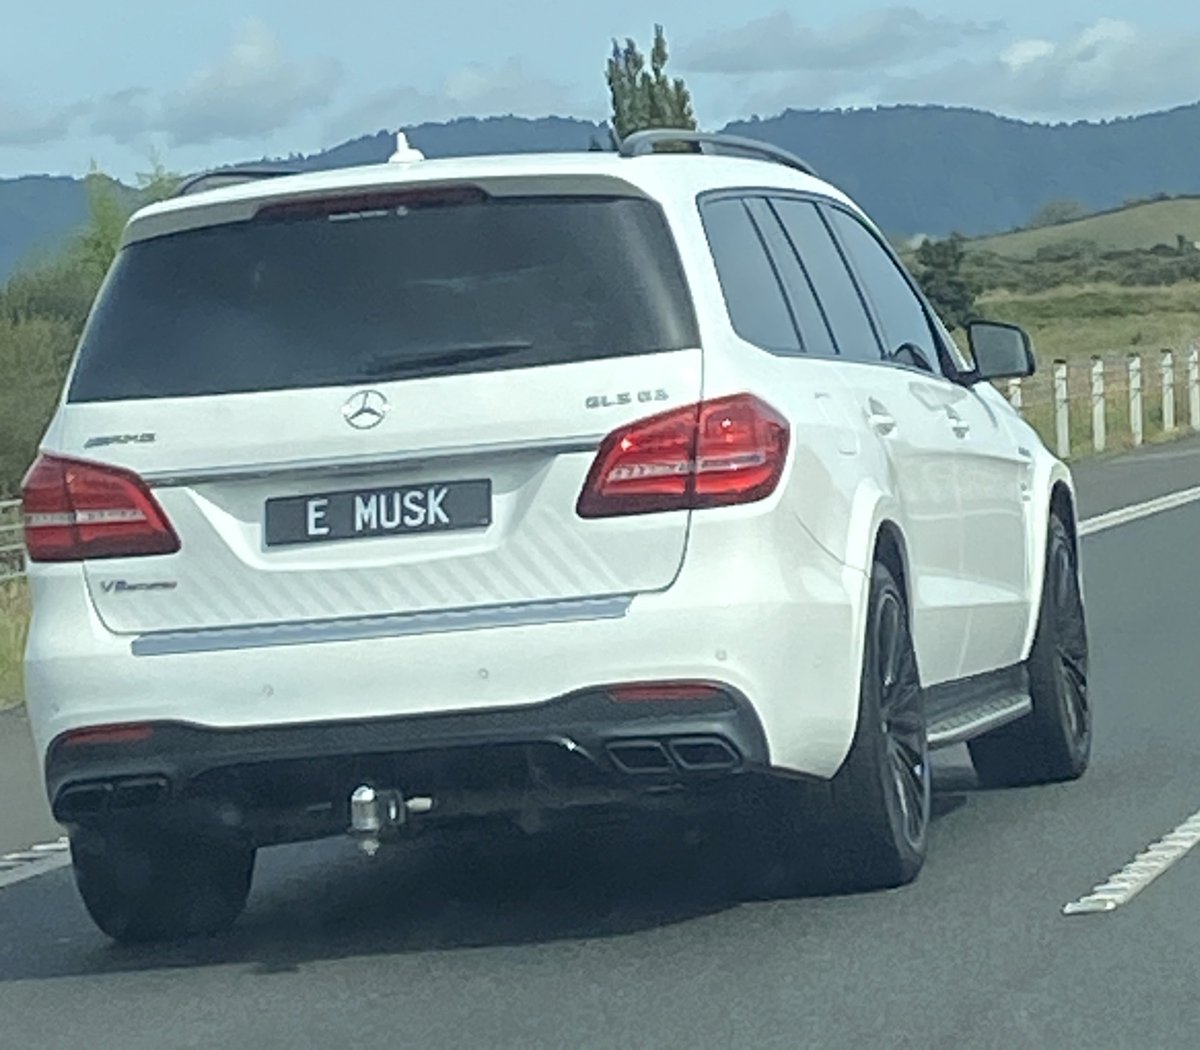 Saw the worst numberplate imaginable today